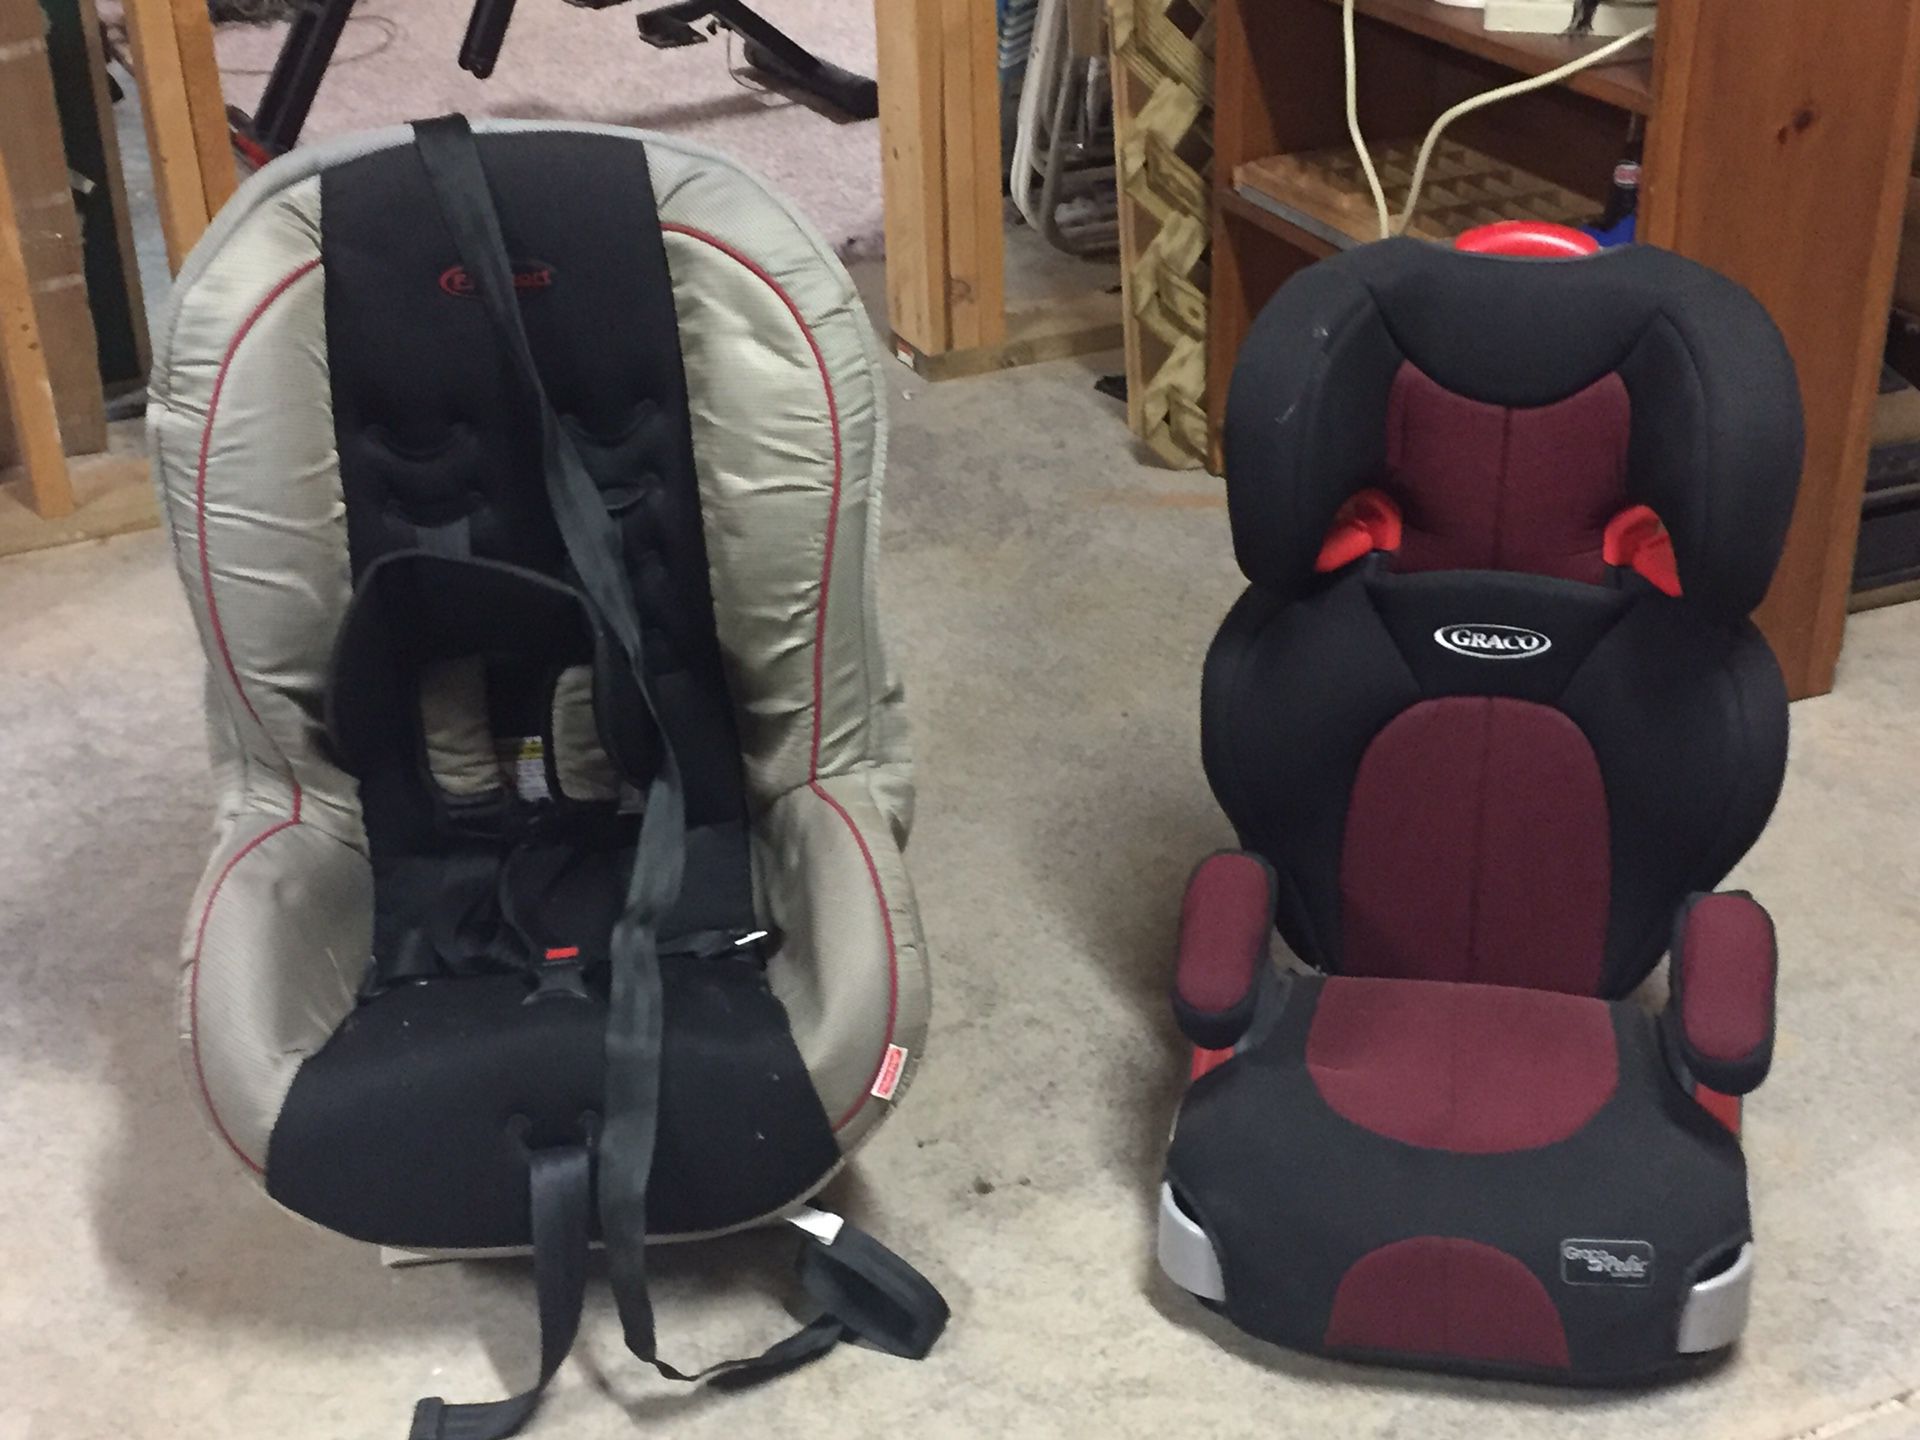 Car seats for infant.